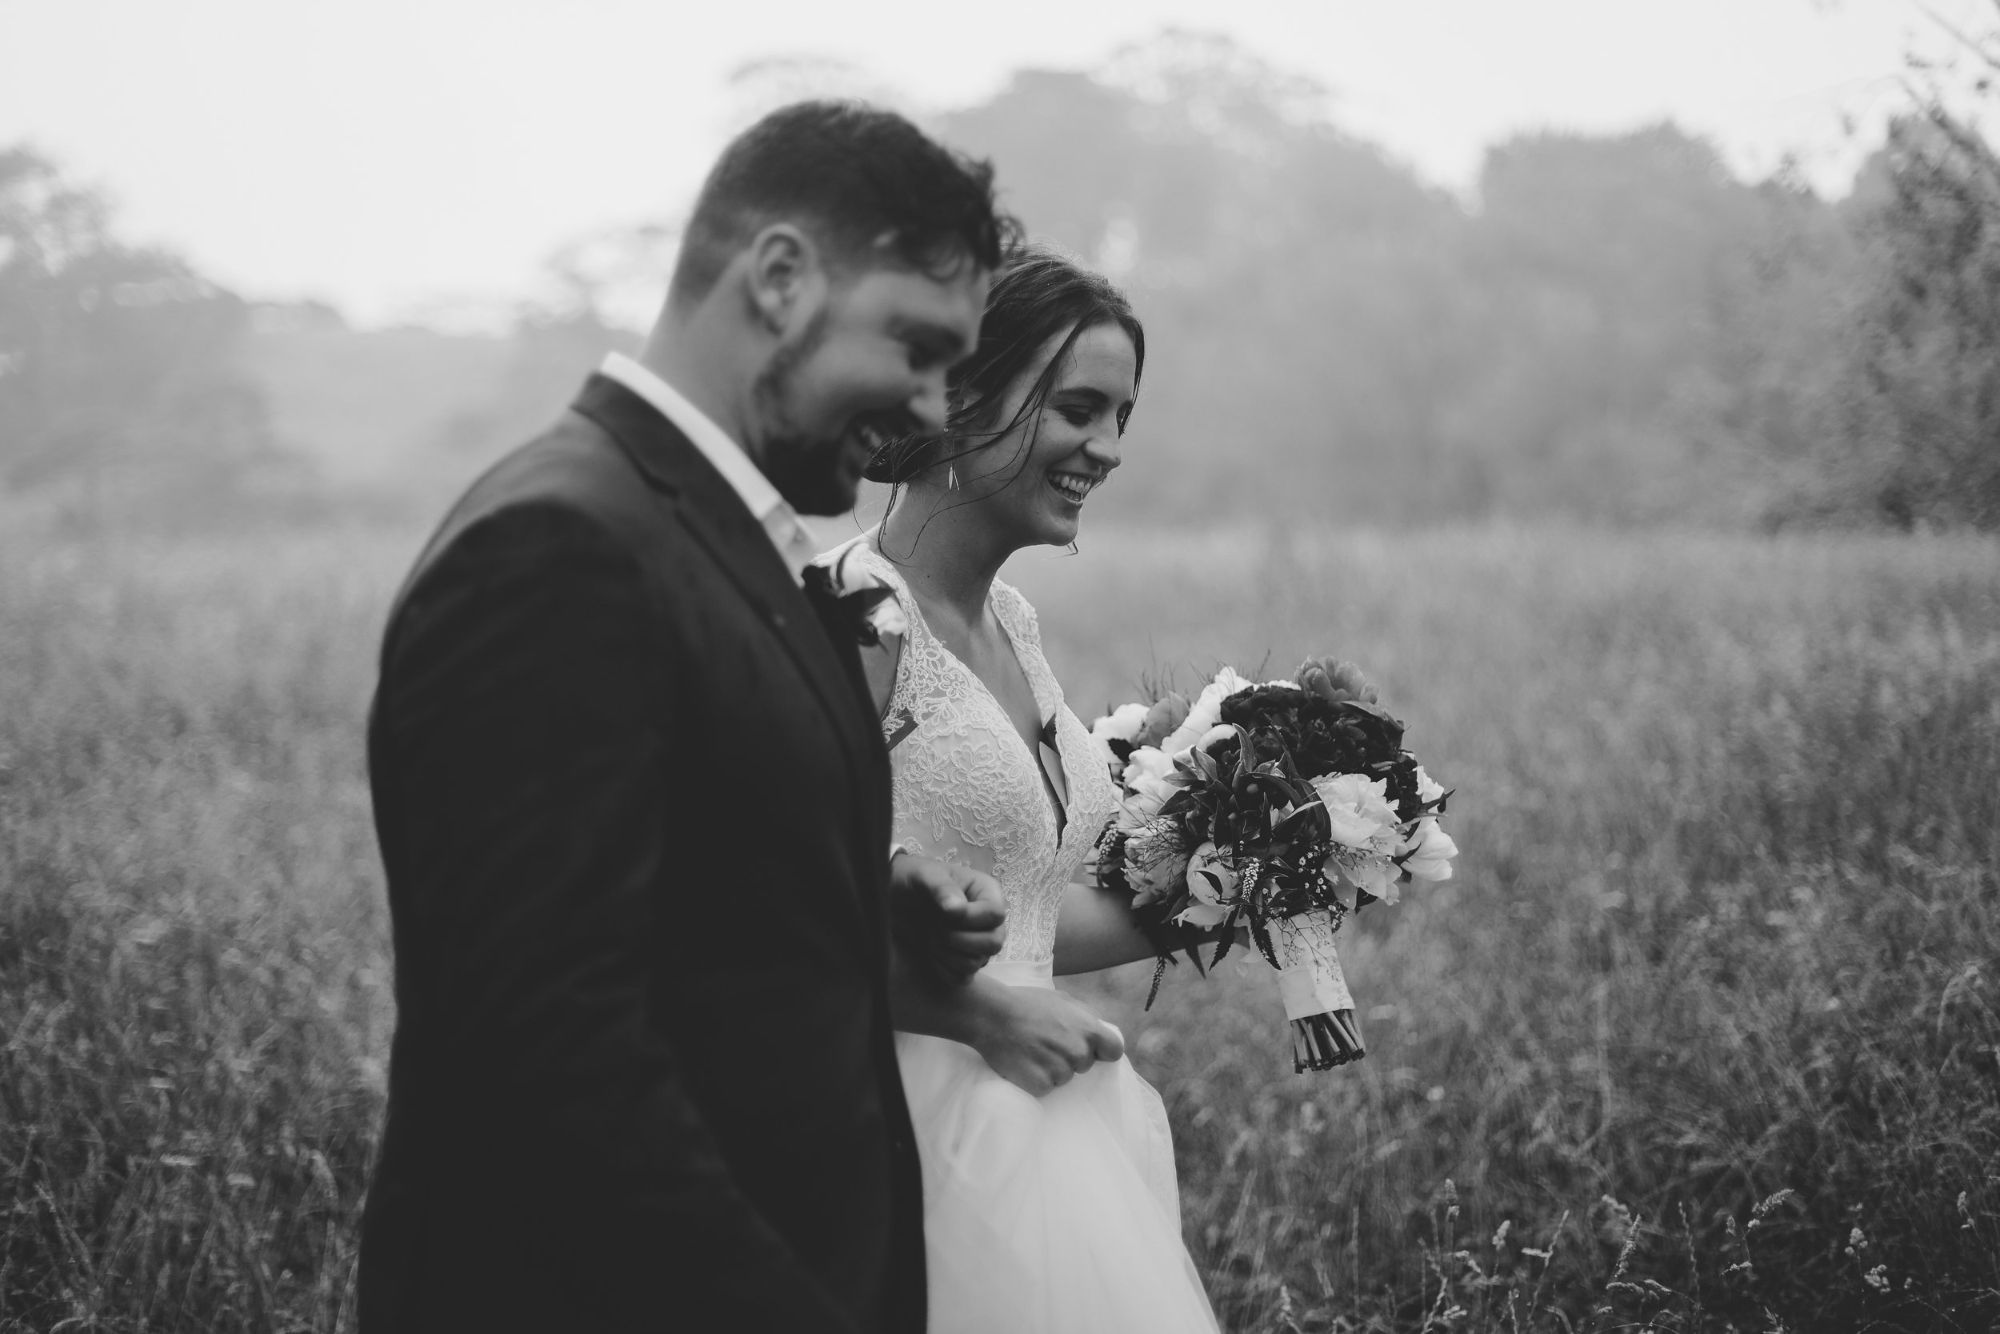 Bride and groom laughing together